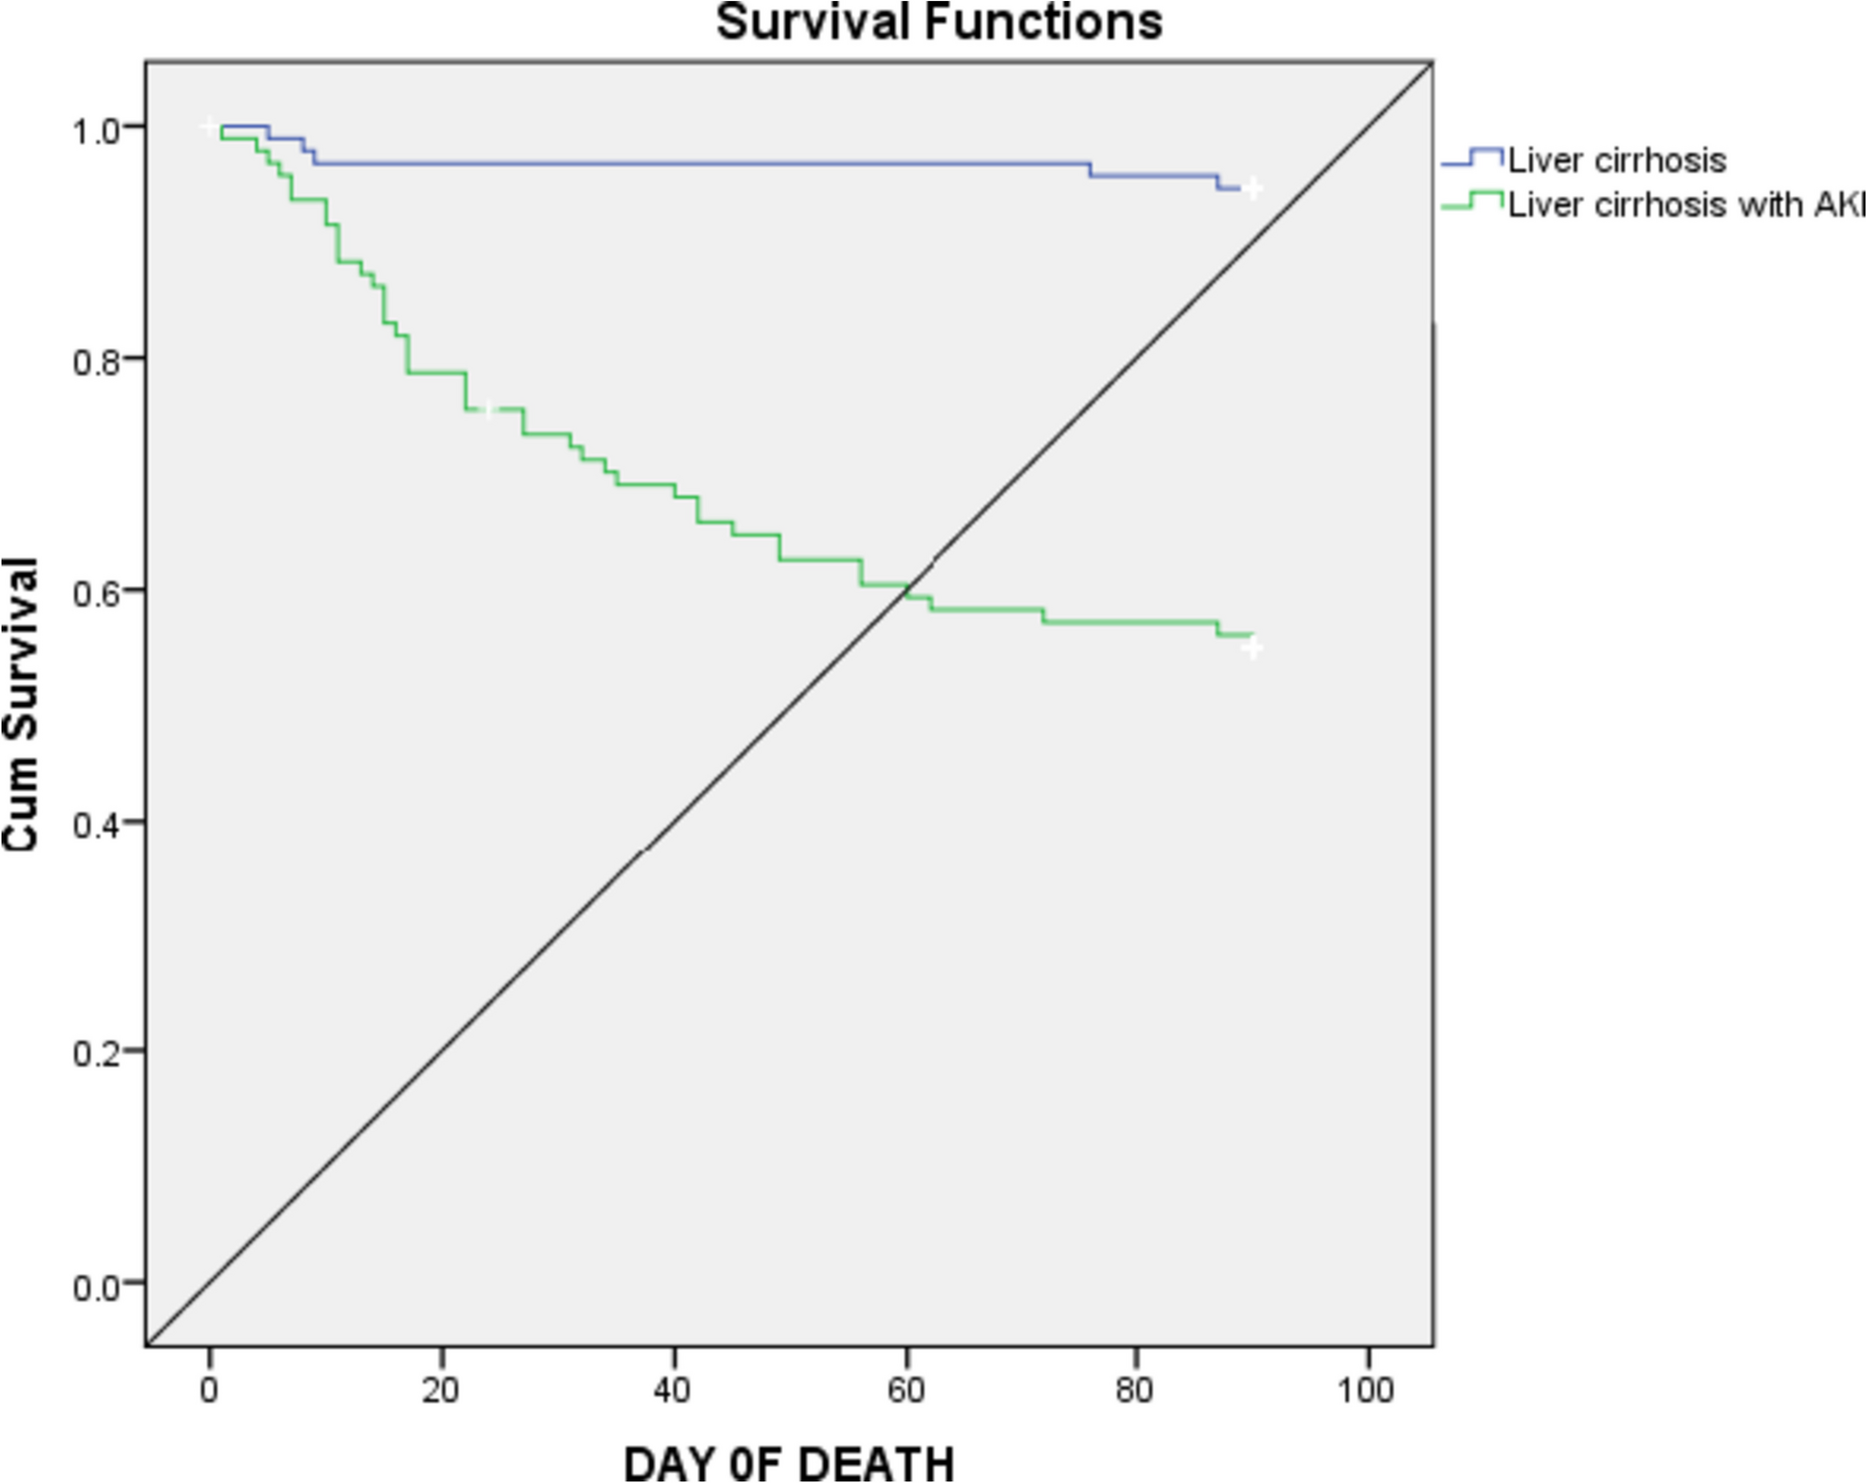 Study of prevalence, risk factors for acute kidney injury, and mortality in liver cirrhosis patients